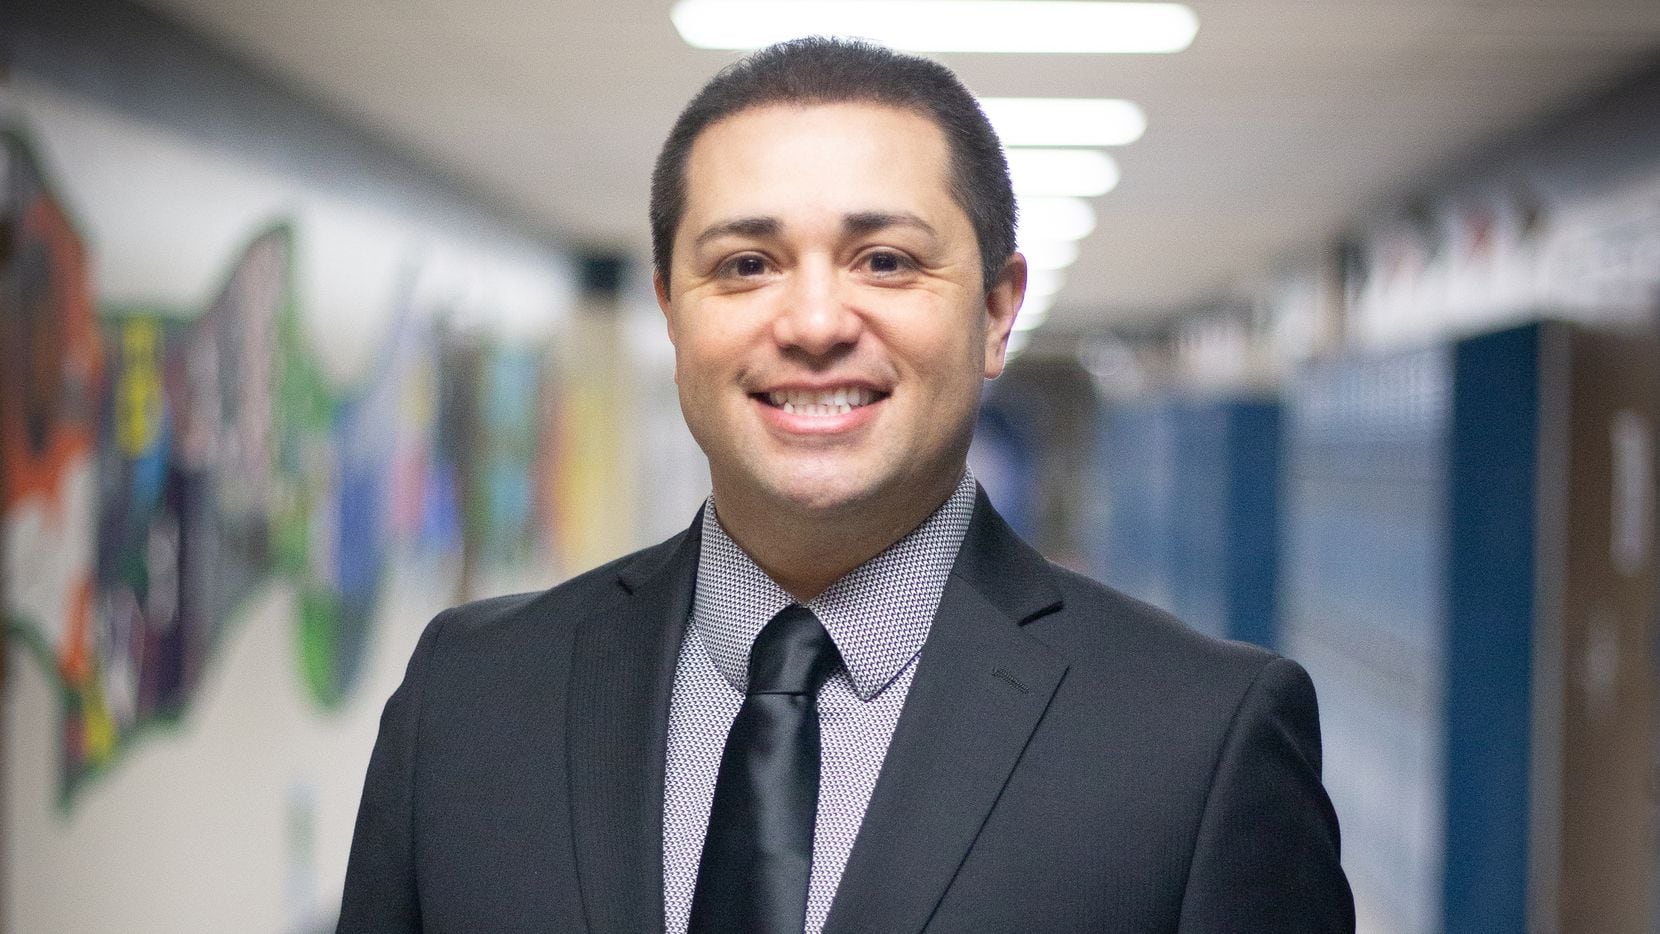 Colleyville Middle School Principal David Arencibia has led the school for seven years. He...